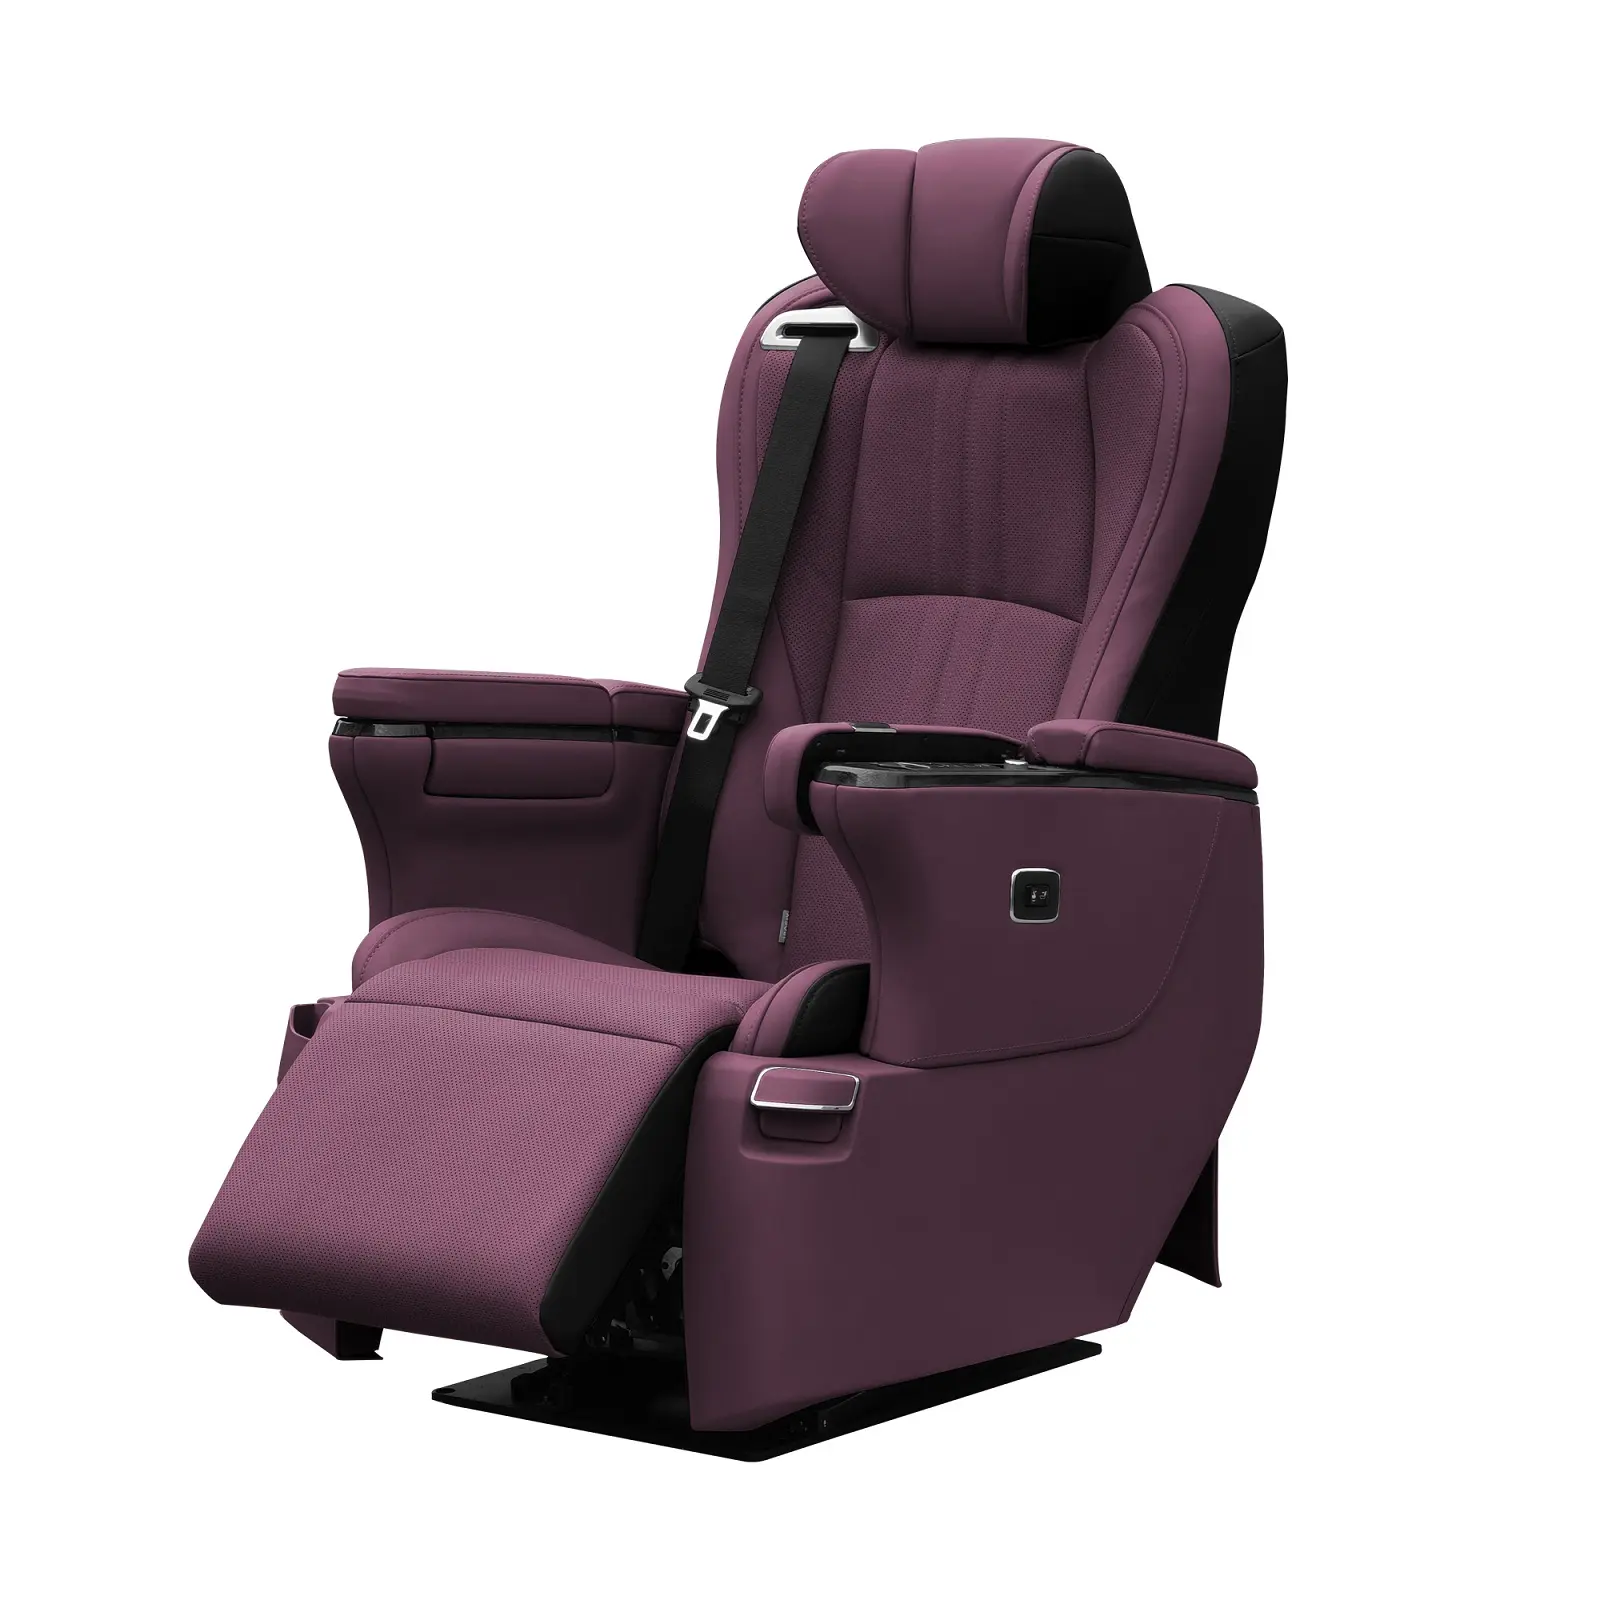 Van auto seat for refitting of MPV like Sprinter, Maybach, GL8, Quest, Imax8, GM8 and so on